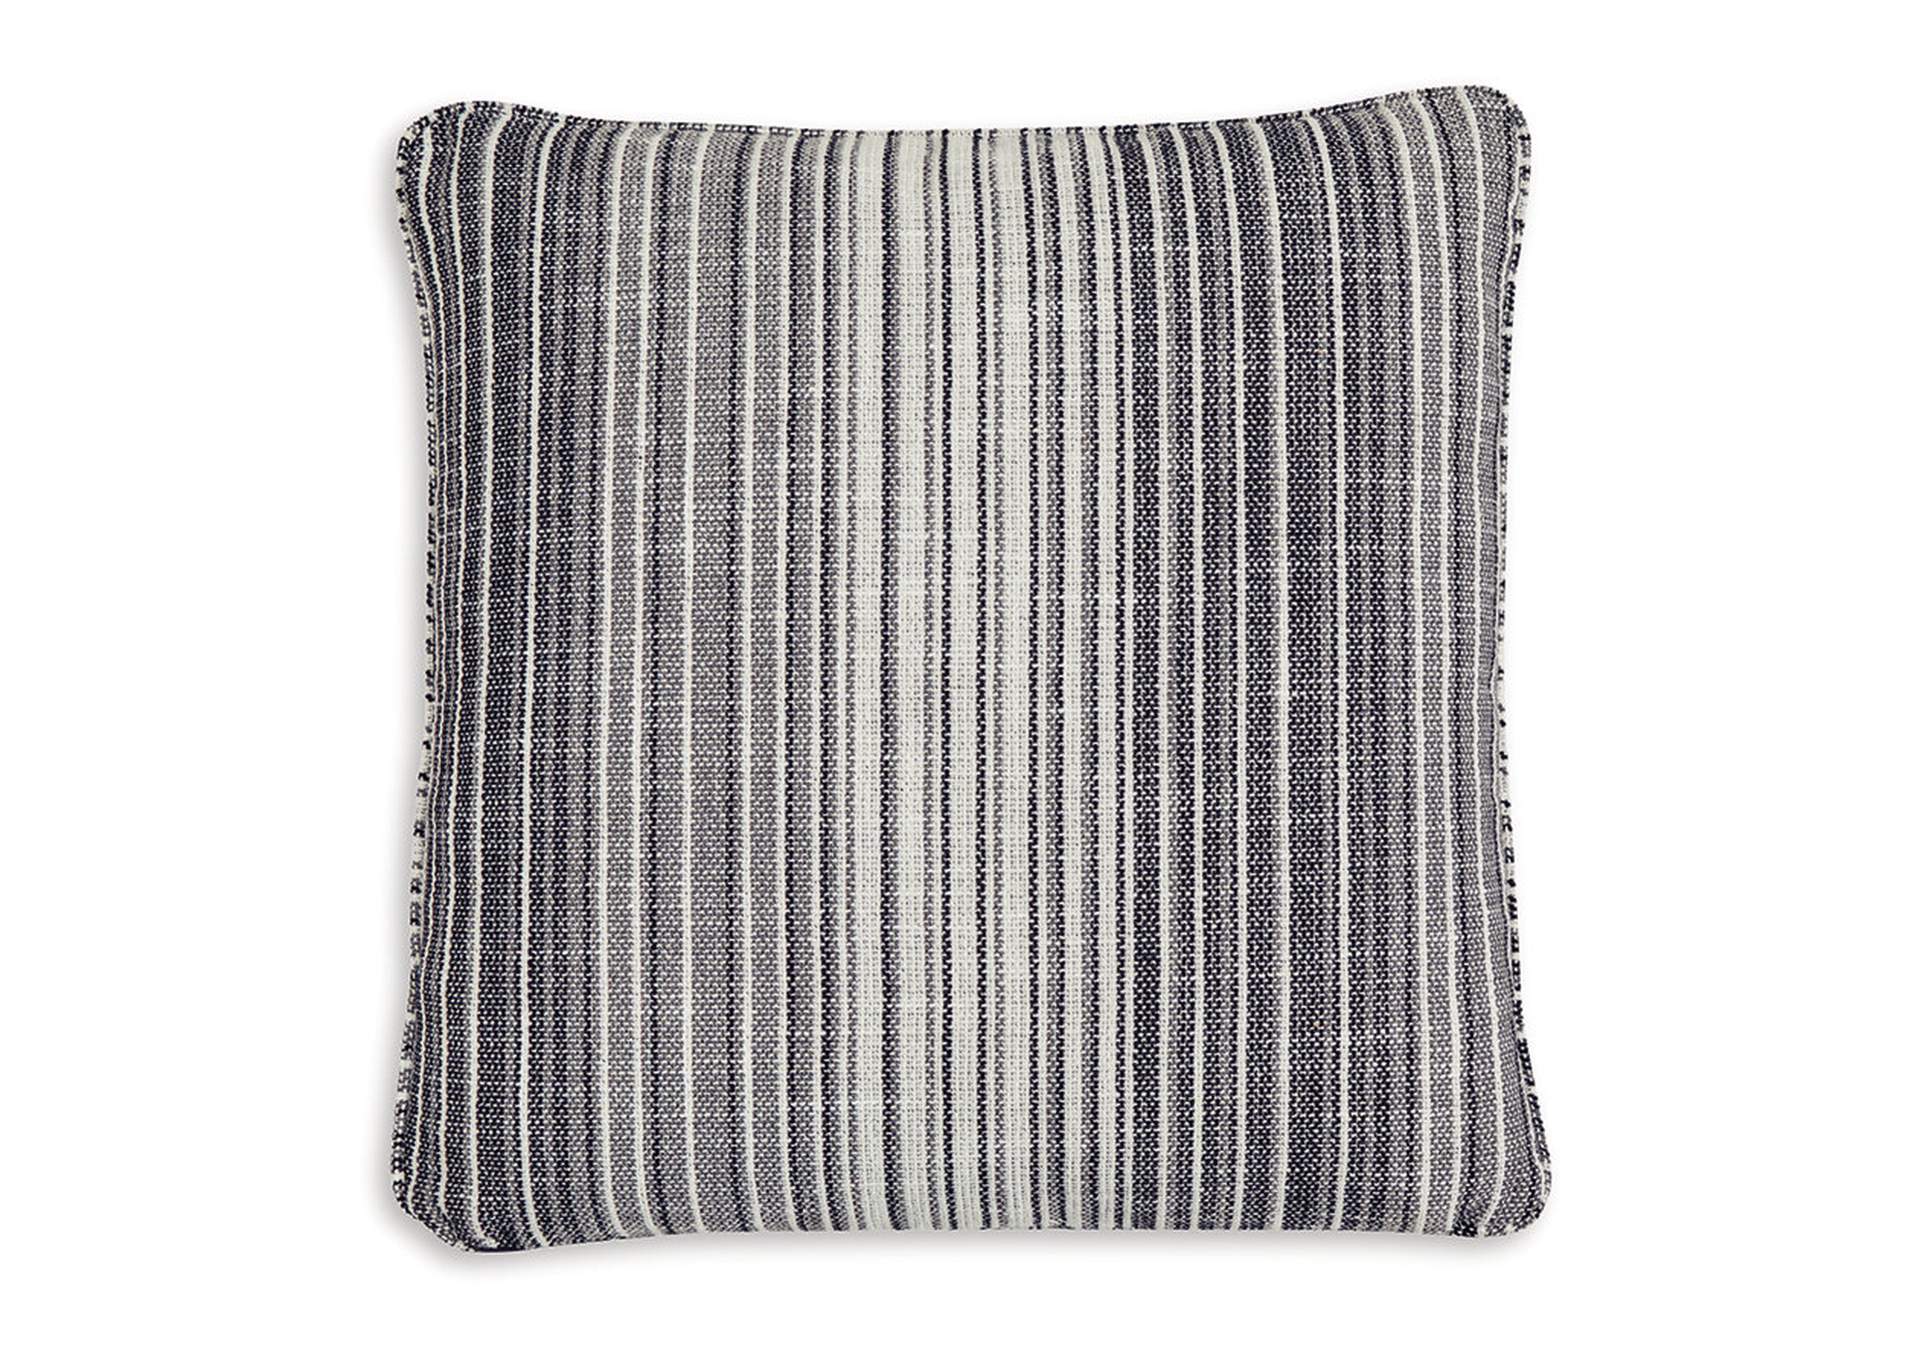 Chadby Next-Gen Nuvella Pillow,Signature Design By Ashley